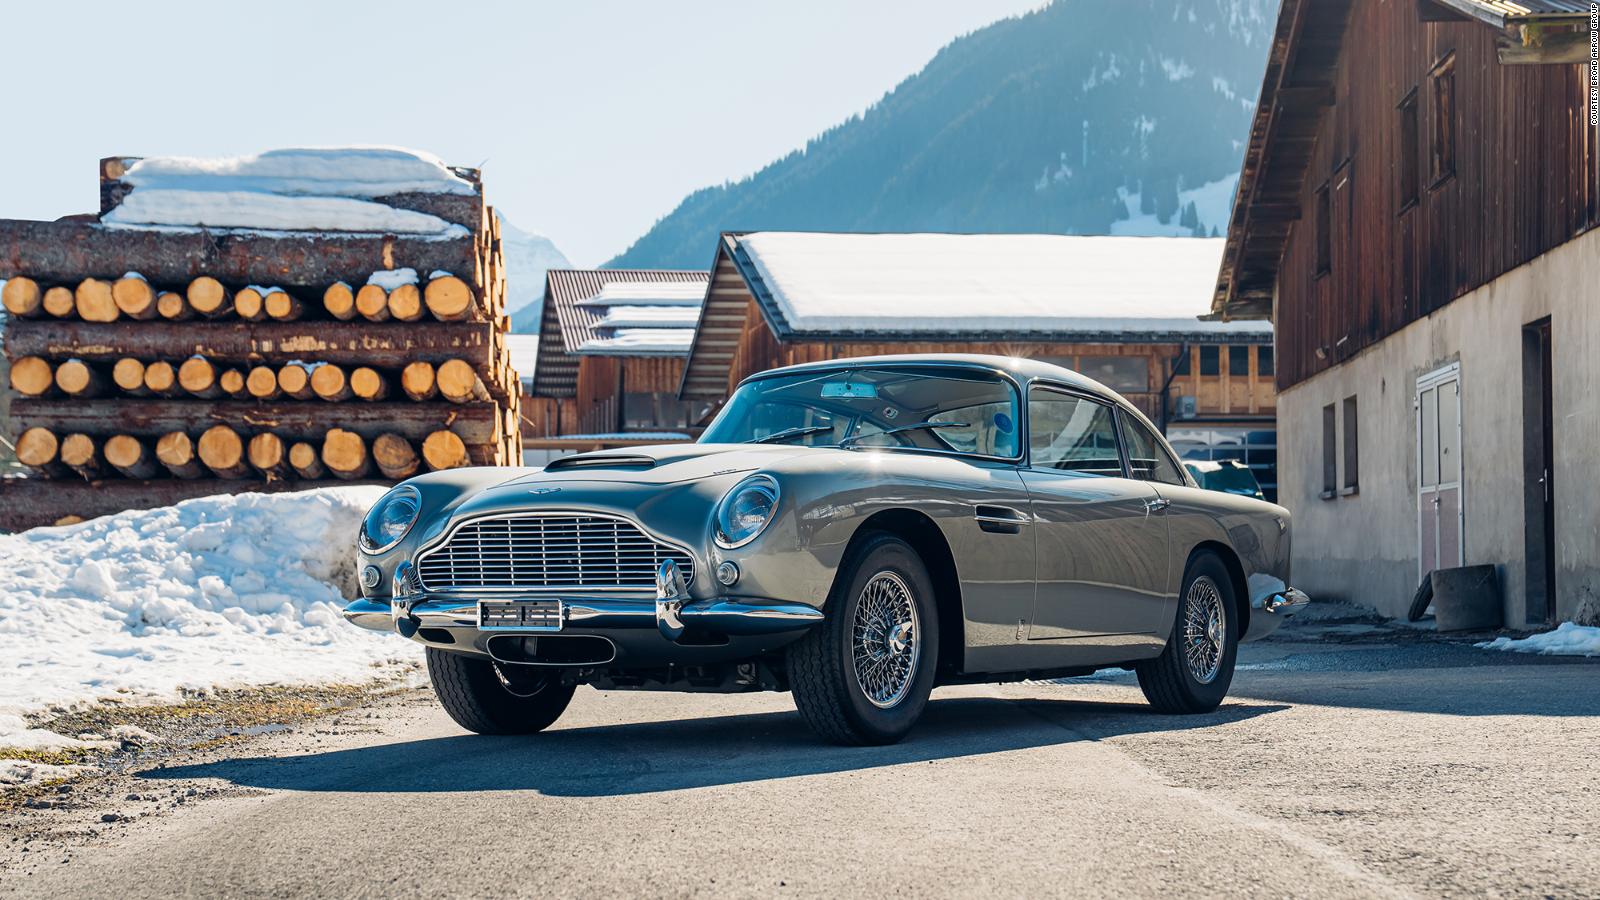 Sean Connery’s ‘James Bond car’ sells for $2.4 million - Share The Good ...